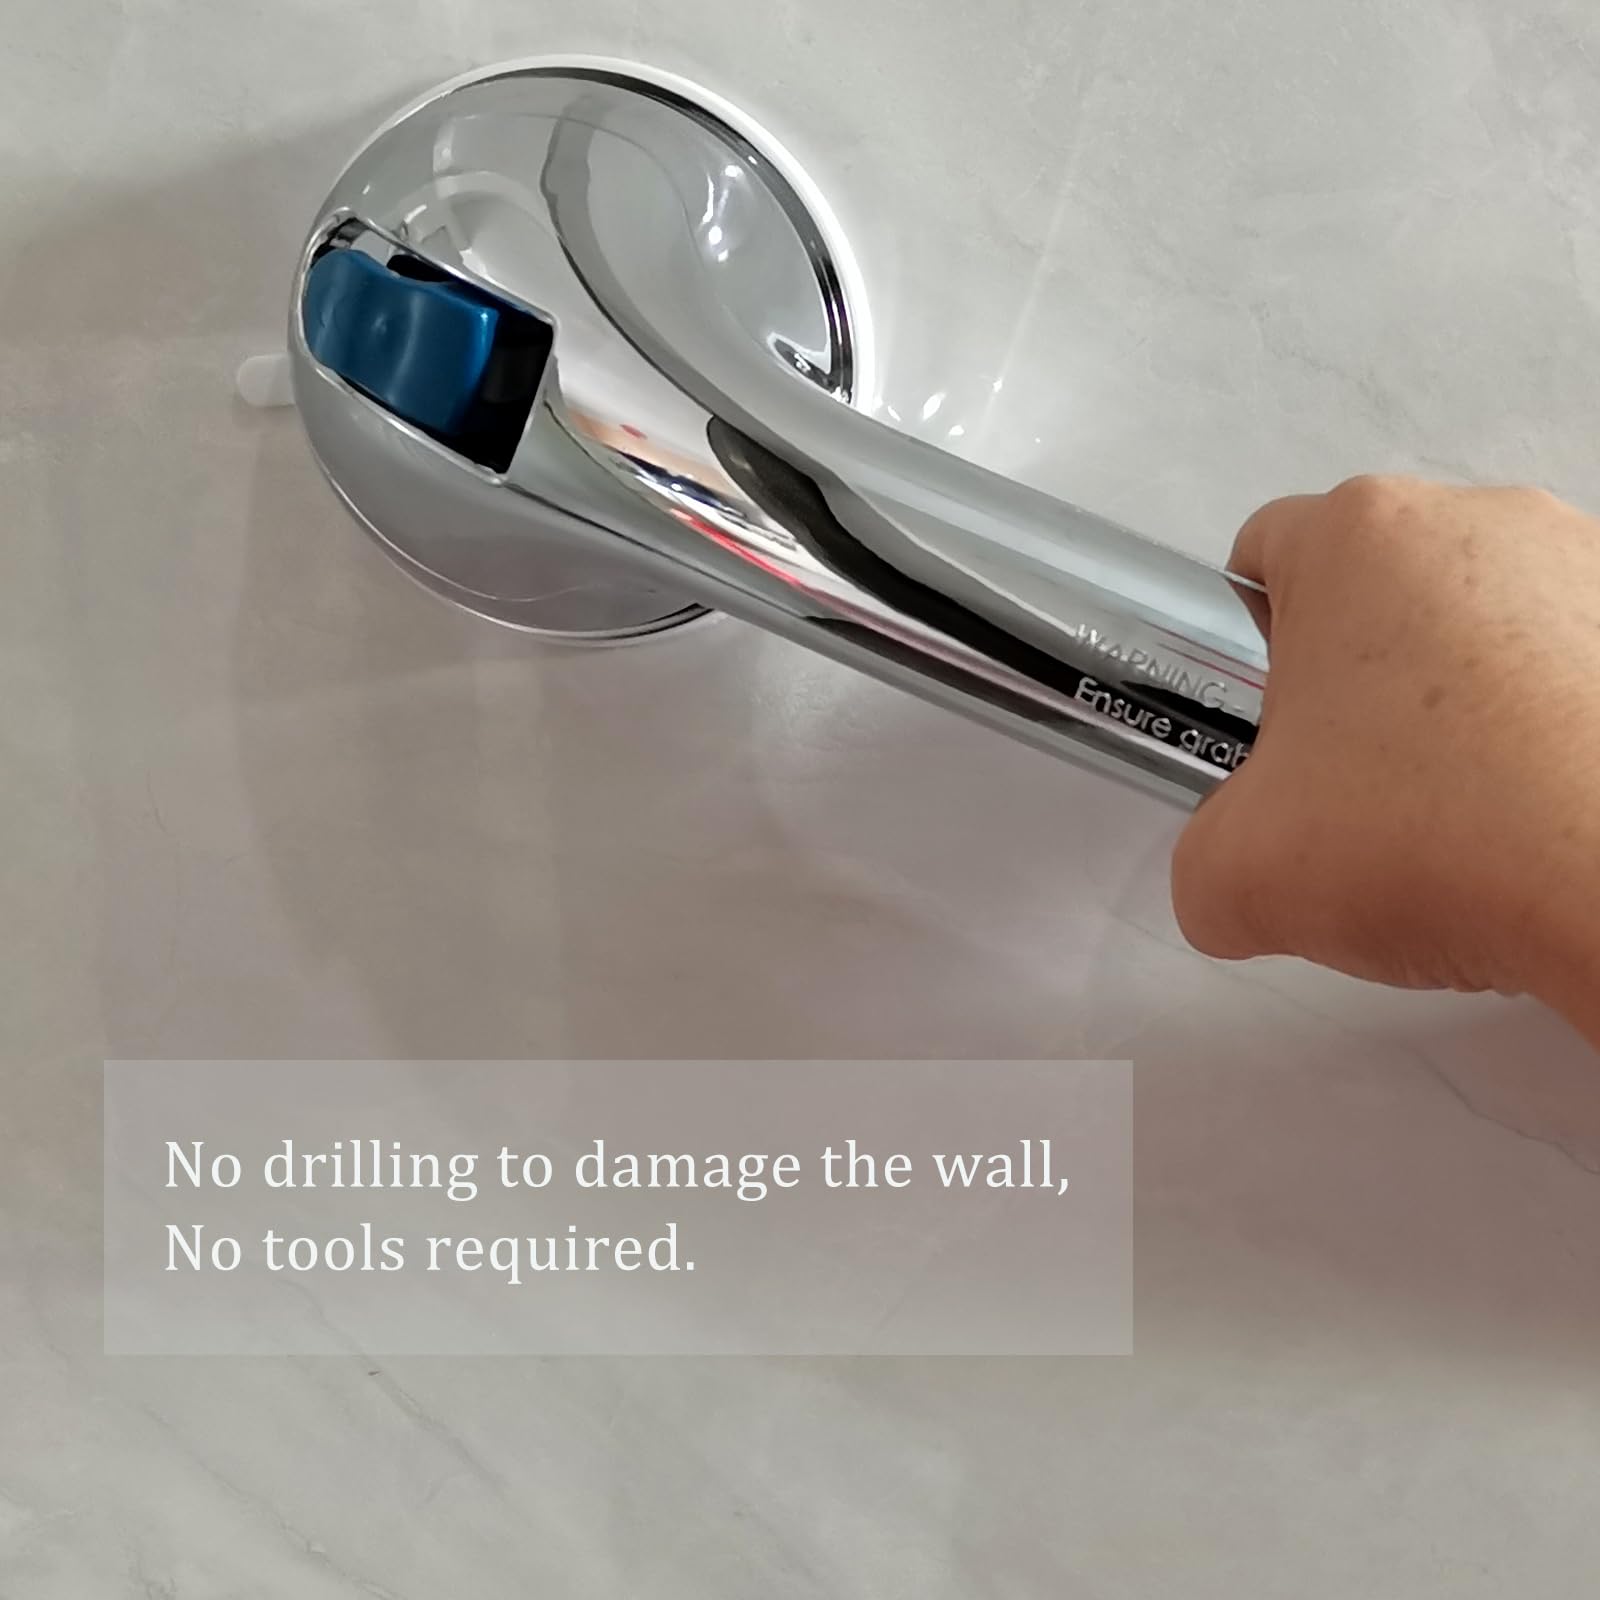 Shower Handle 16 inch Shower Grab Bar for Seniors and Elderly 2 Pack Strong Suction Cup Grab Bars for Bathroom and Showers Bathtub Grab Bar Waterproof, No Drilling Safety Assist Handle